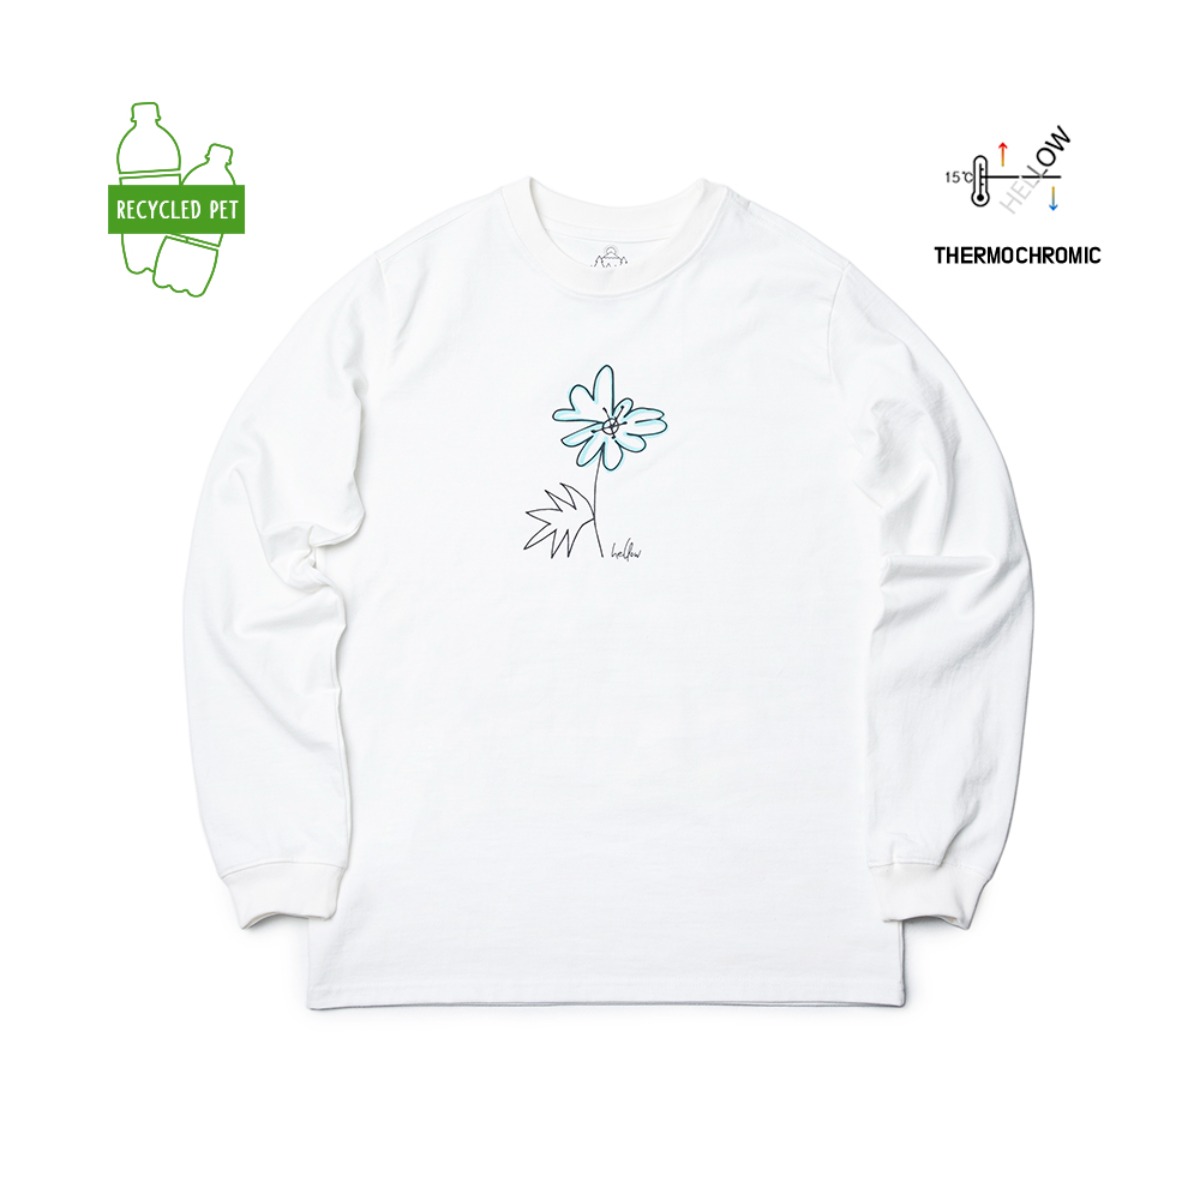 Thermochromic  Recycle LOGO LS T white